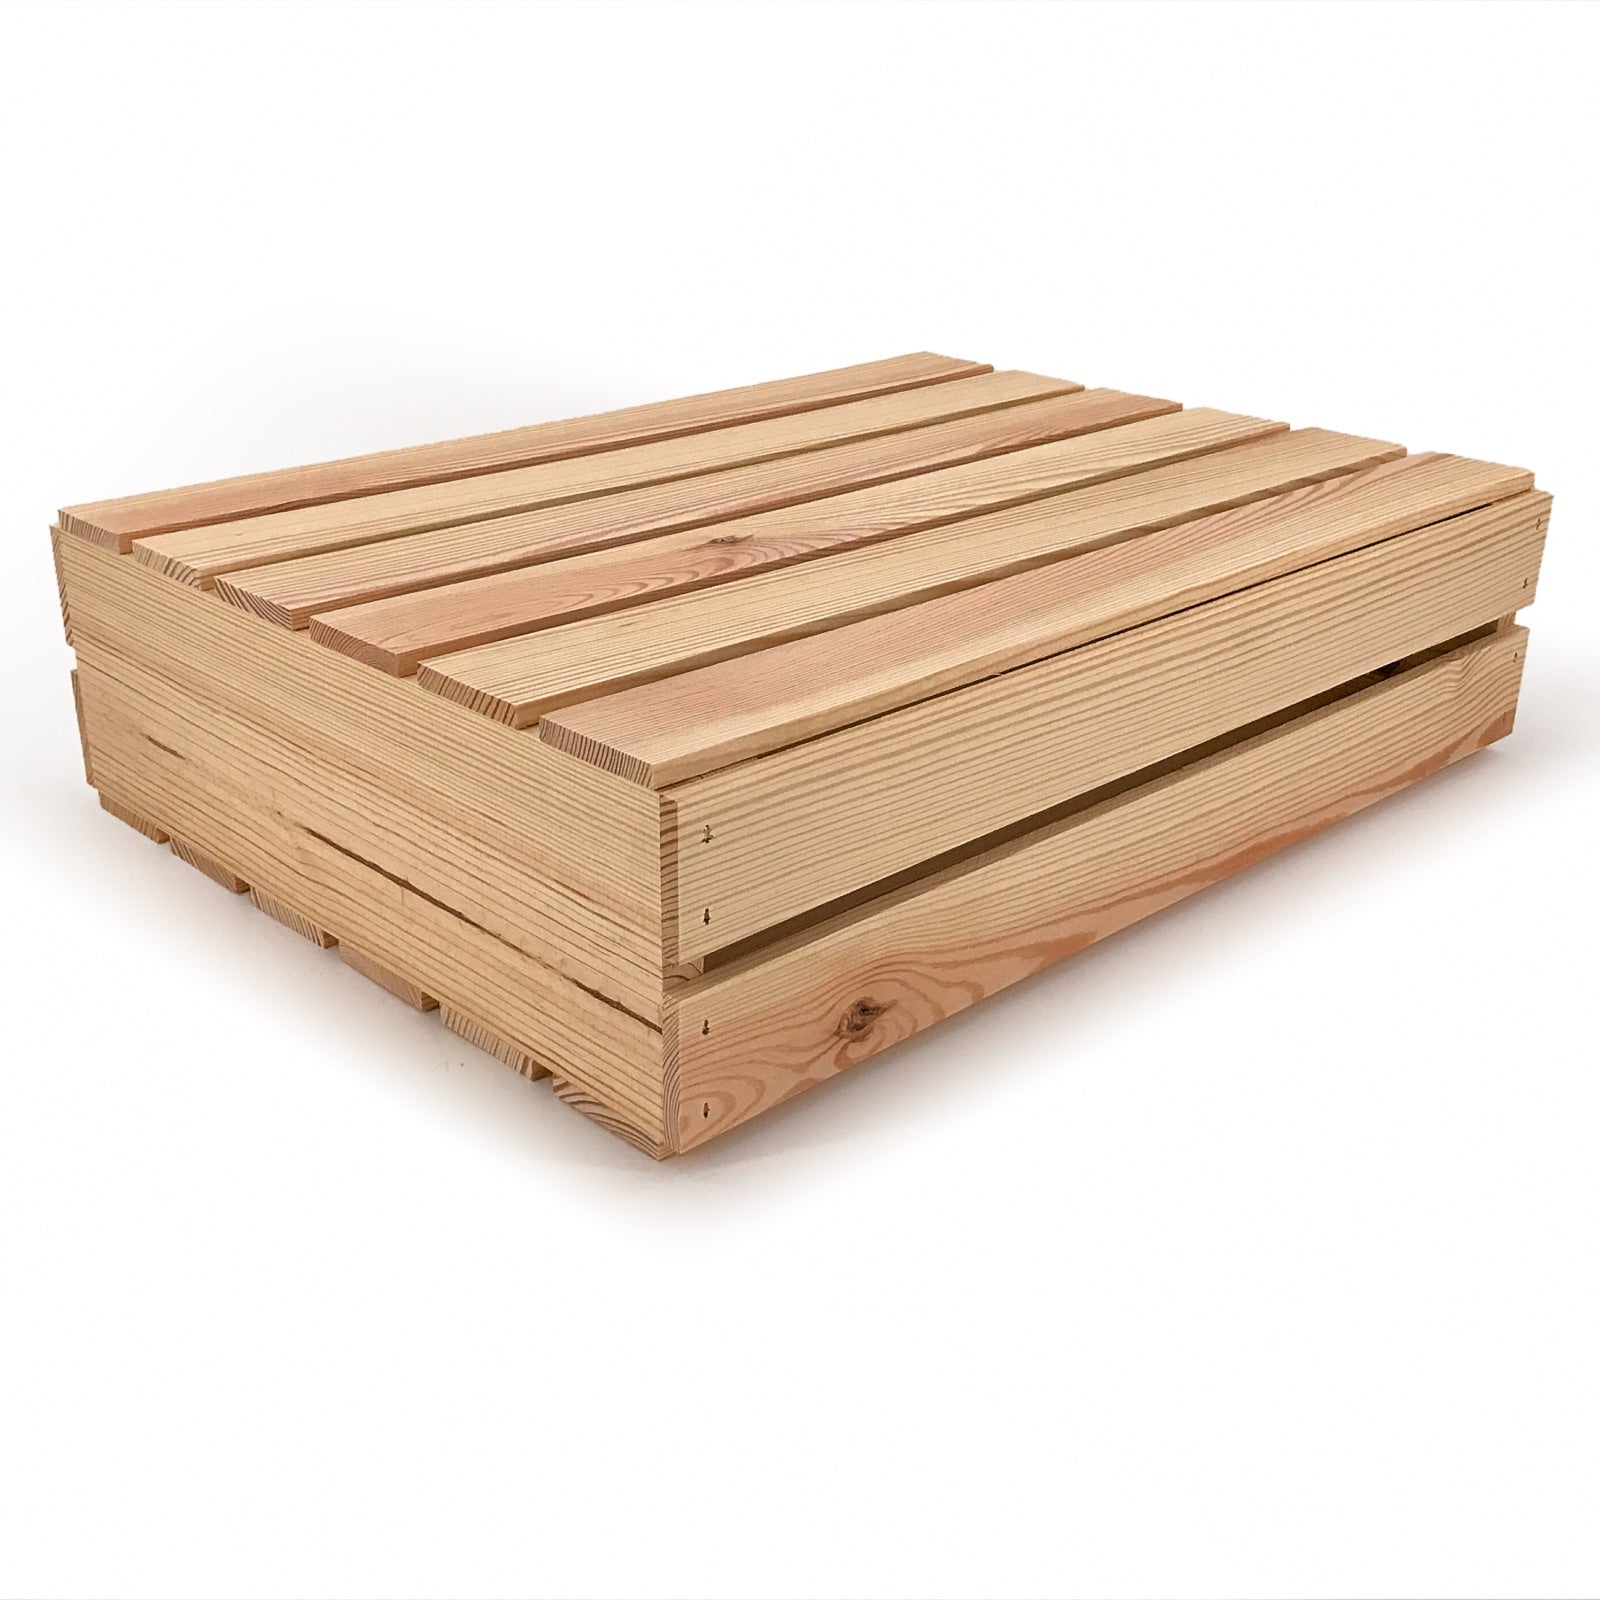 Small wooden crate with lid 22x17x5.25, 6-WS-22-17-5.25-NX-NW-LL, 12-WS-22-17-5.25-NX-NW-LL, 24-WS-22-17-5.25-NX-NW-LL, 48-WS-22-17-5.25-NX-NW-LL, 96-WS-22-17-5.25-NX-NW-LL